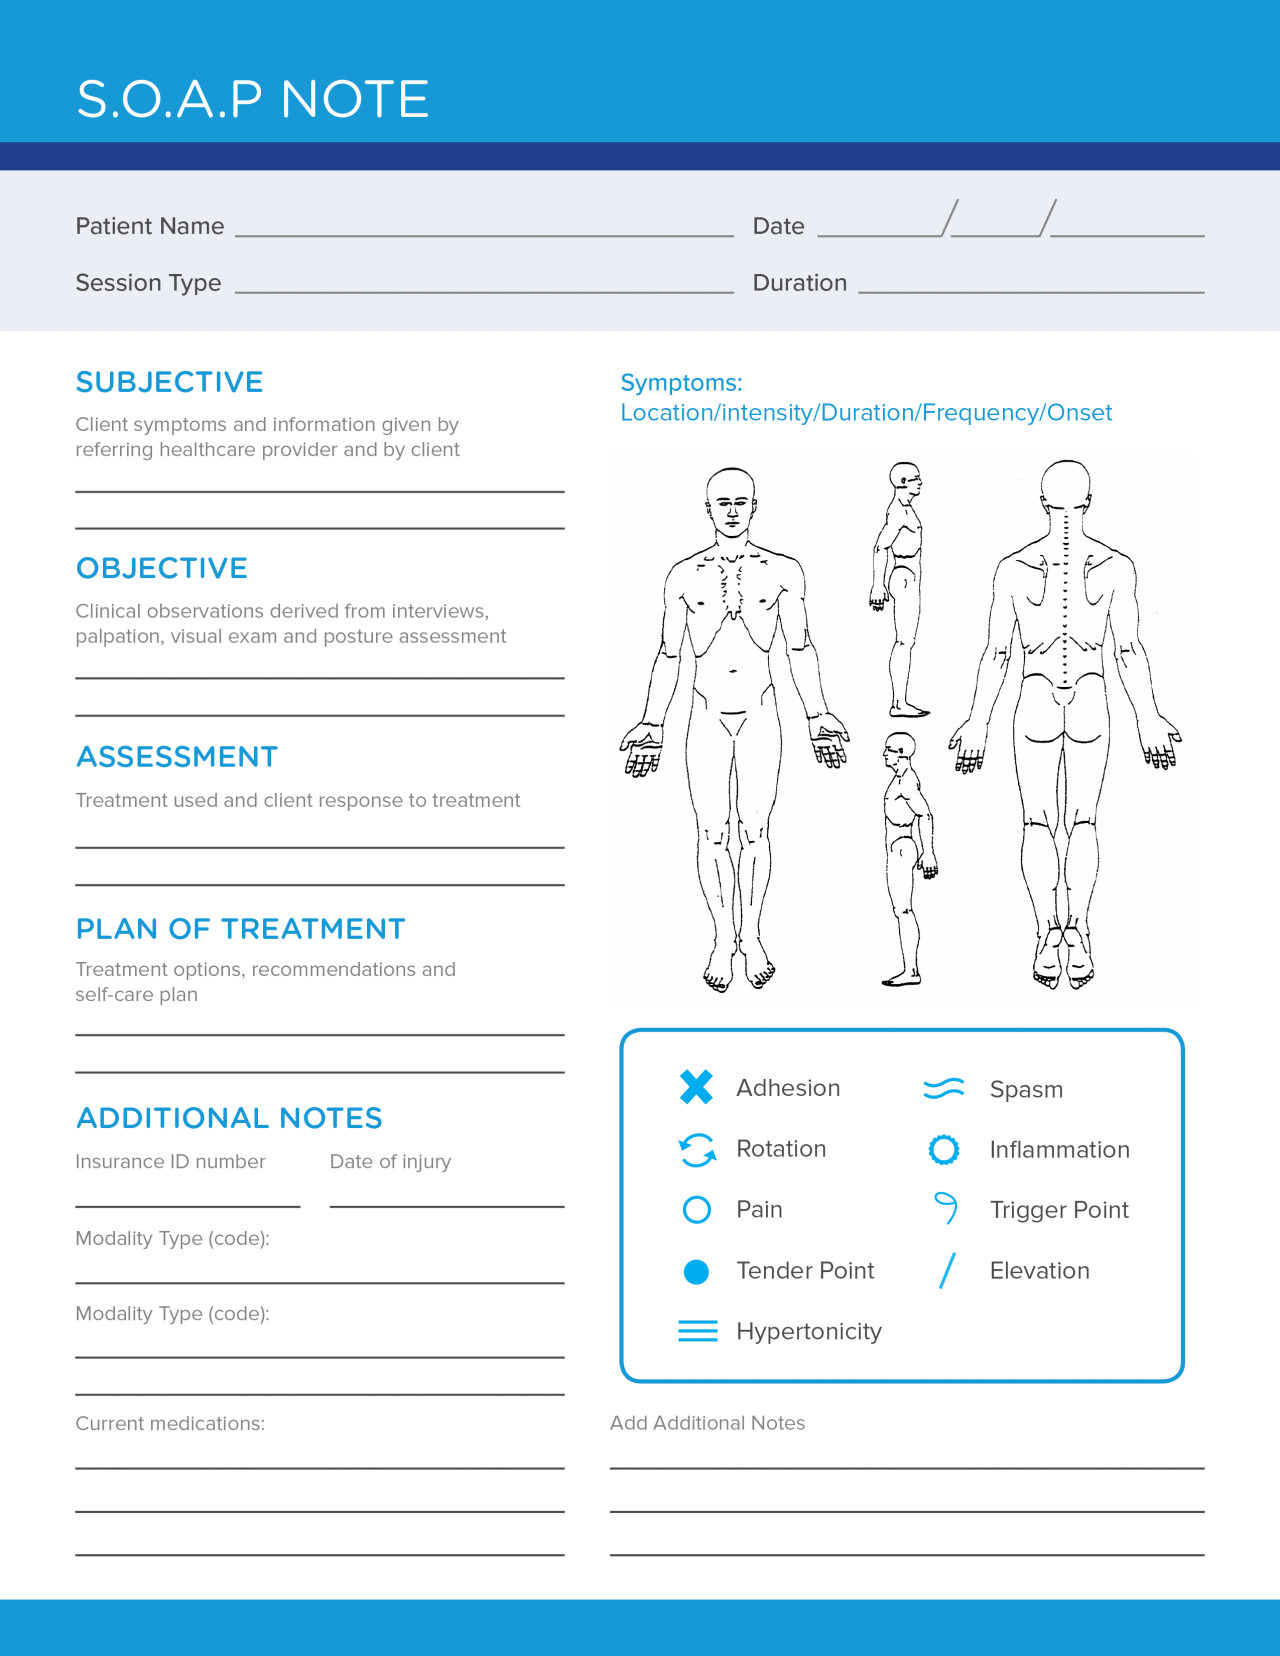 Free SOAP Notes Templates for Busy Healthcare Professionals  Capterra